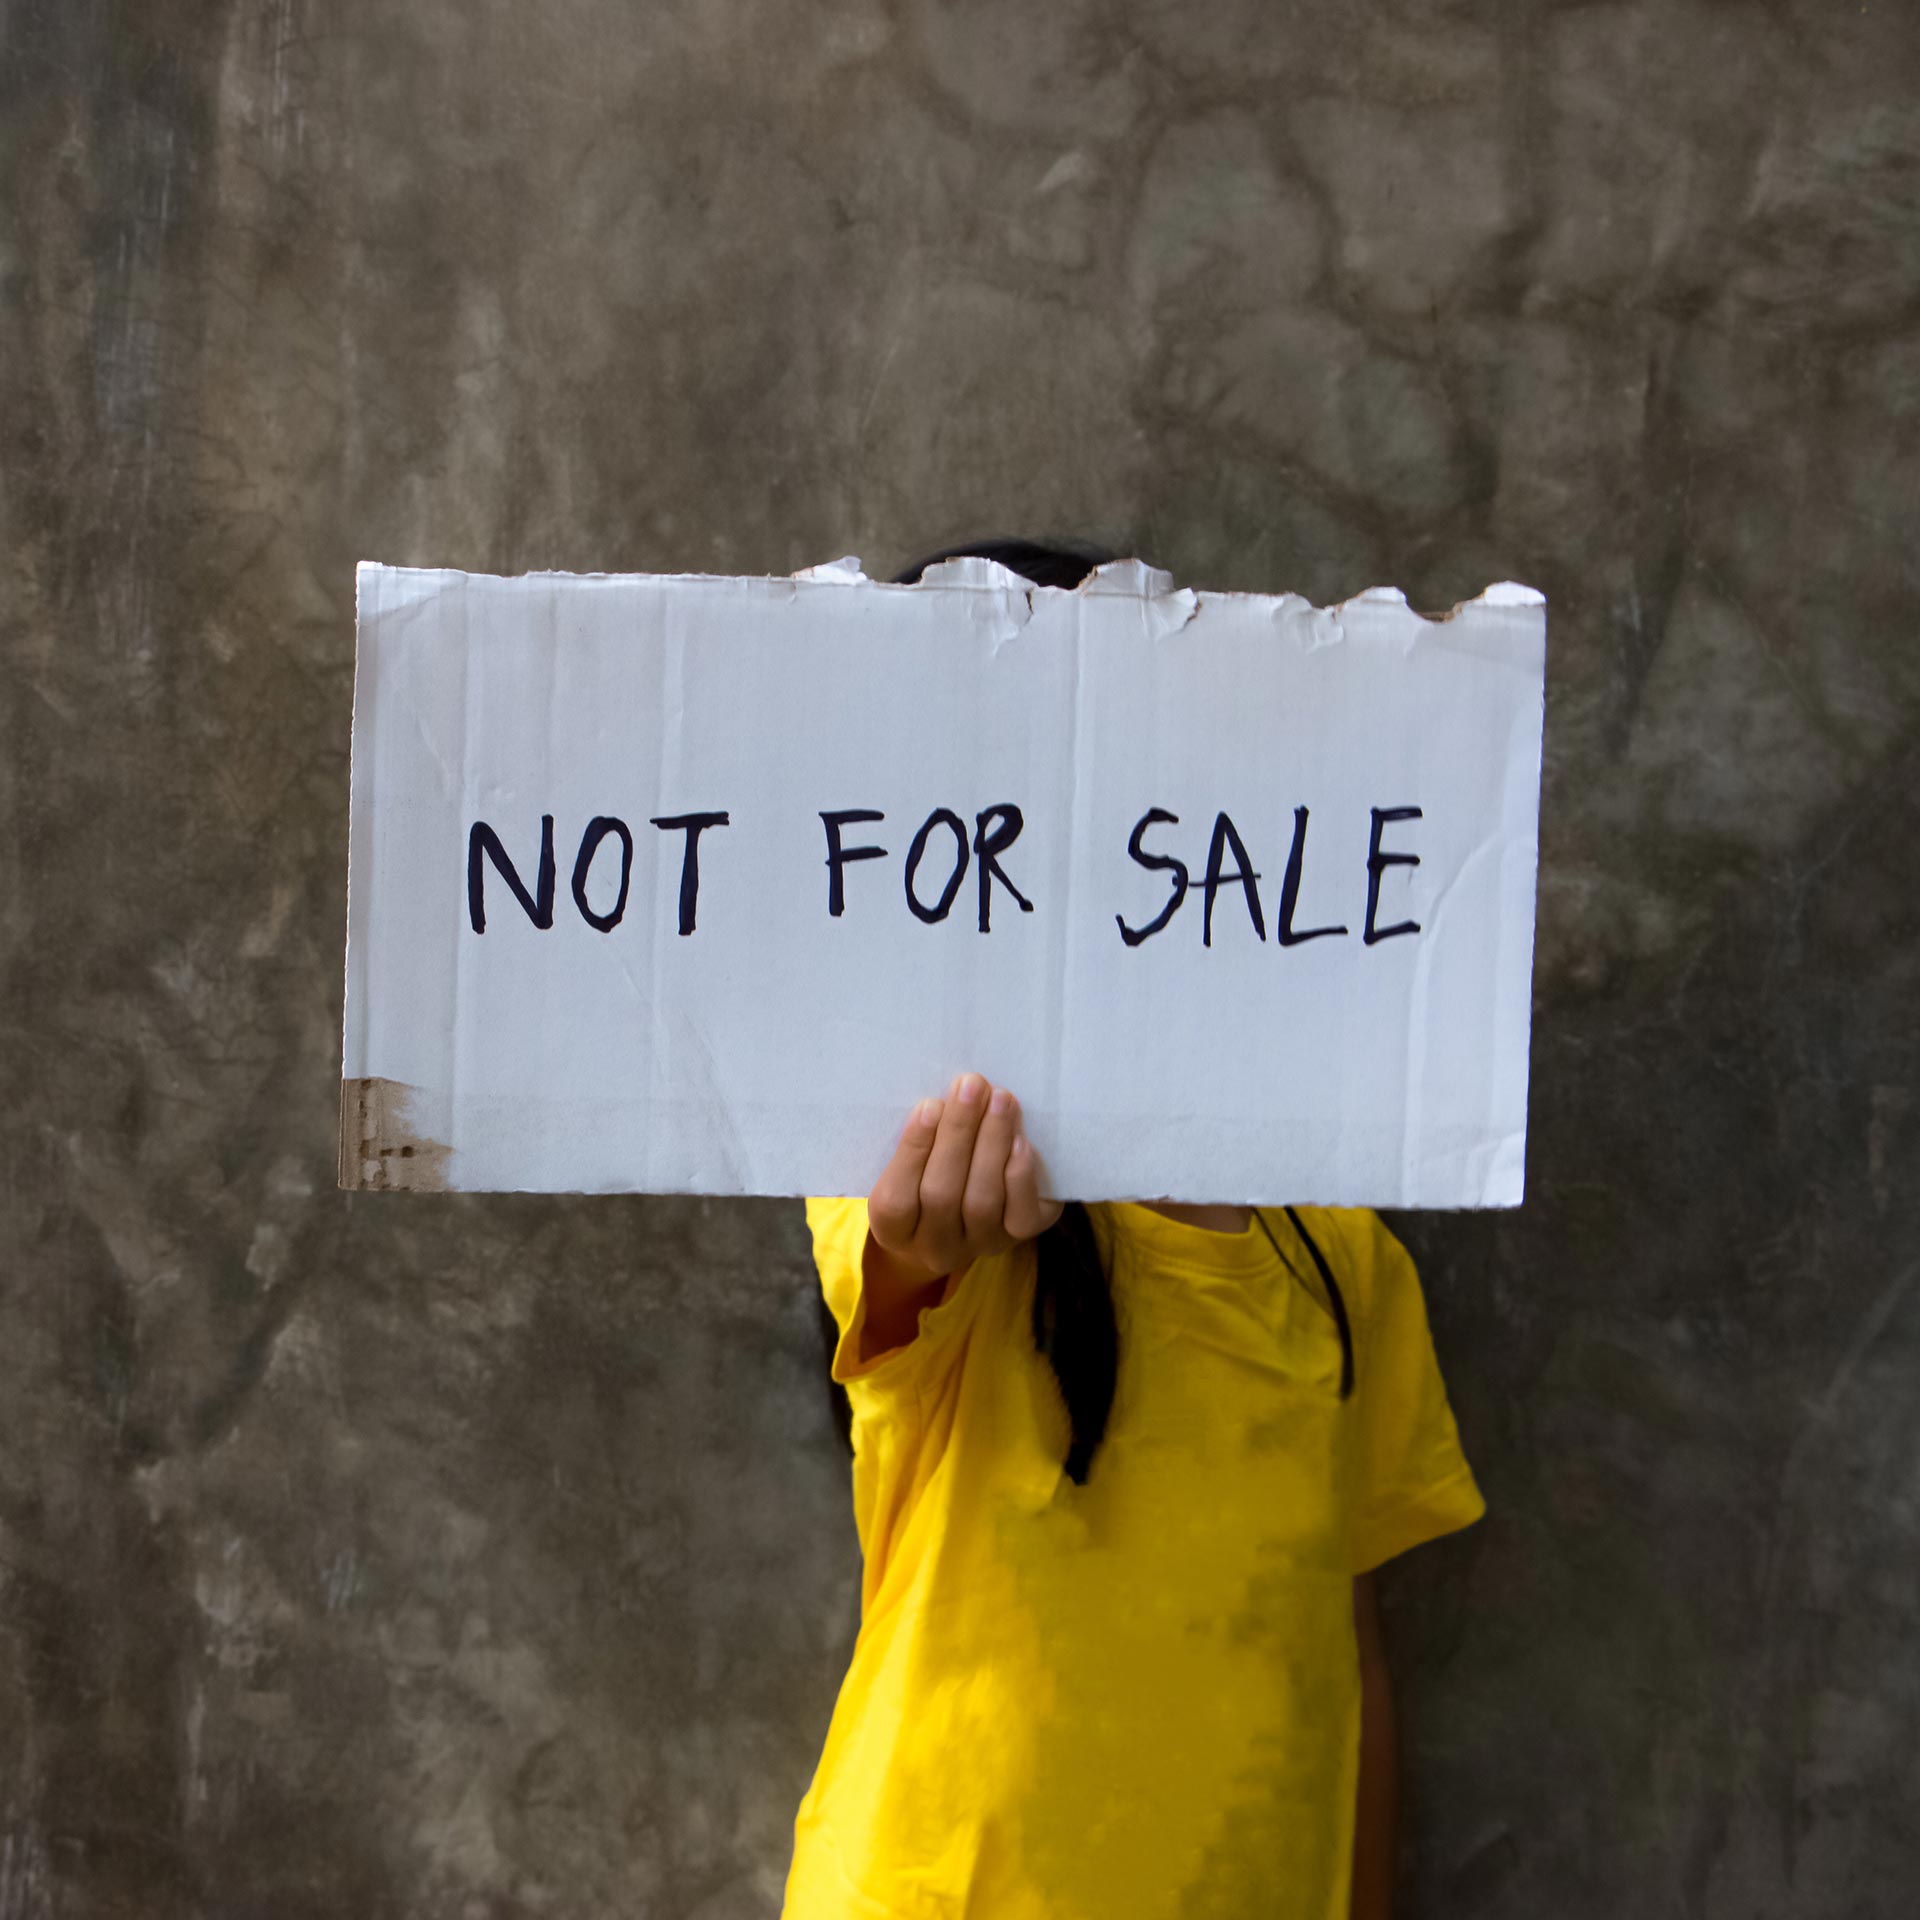 Human trafficking. I'm not for sale. Humans are not a product. Stop child abuse.